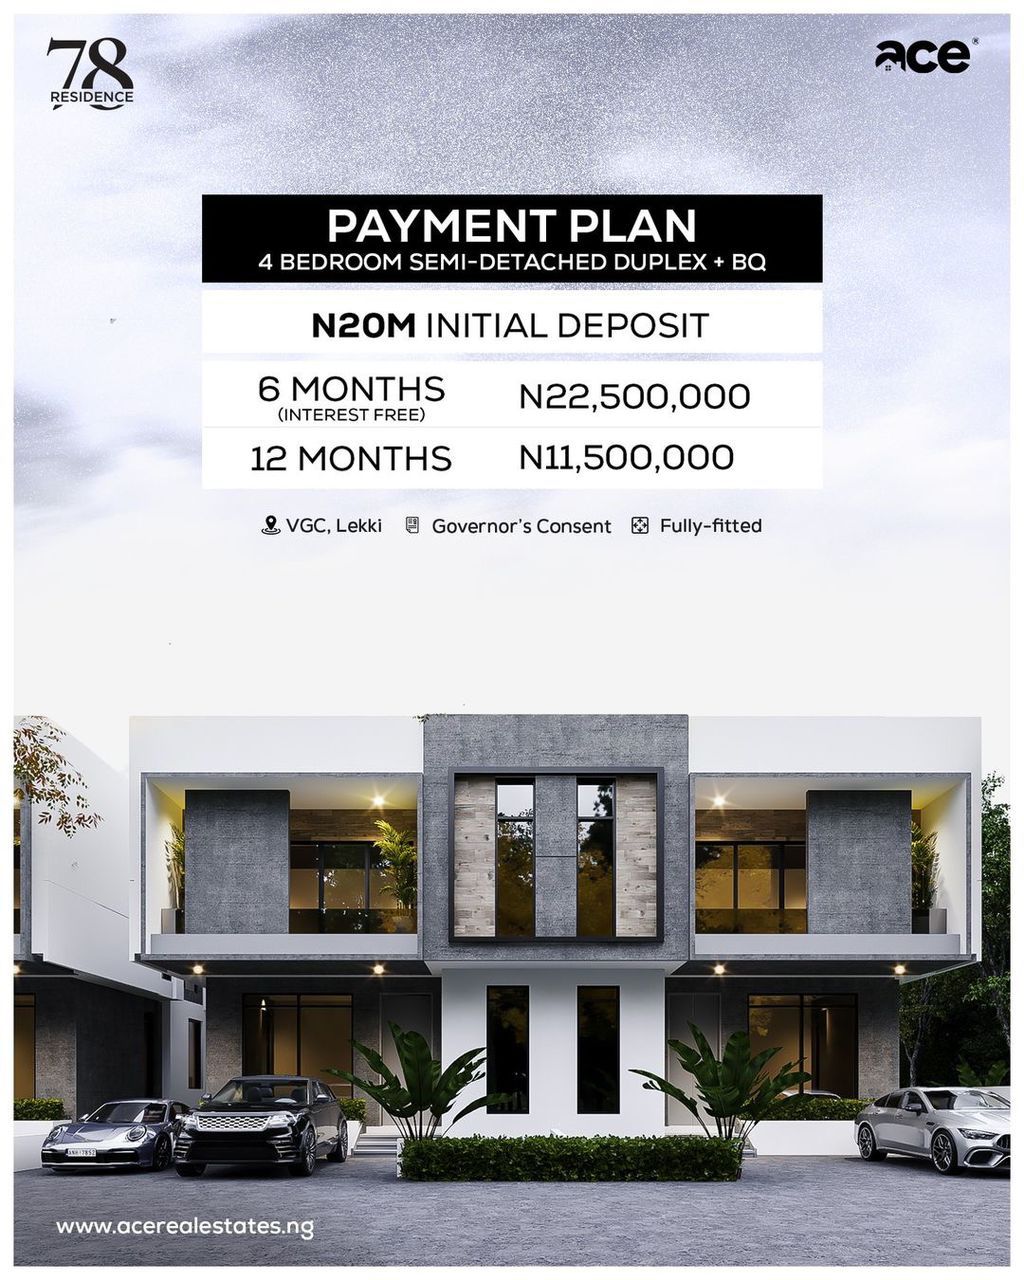 78 Residence, the most stunning residential development in VGC Lekki, now officially on the market. Choose any of our 4-bedroom terraces or Semi-detached units as your next home.